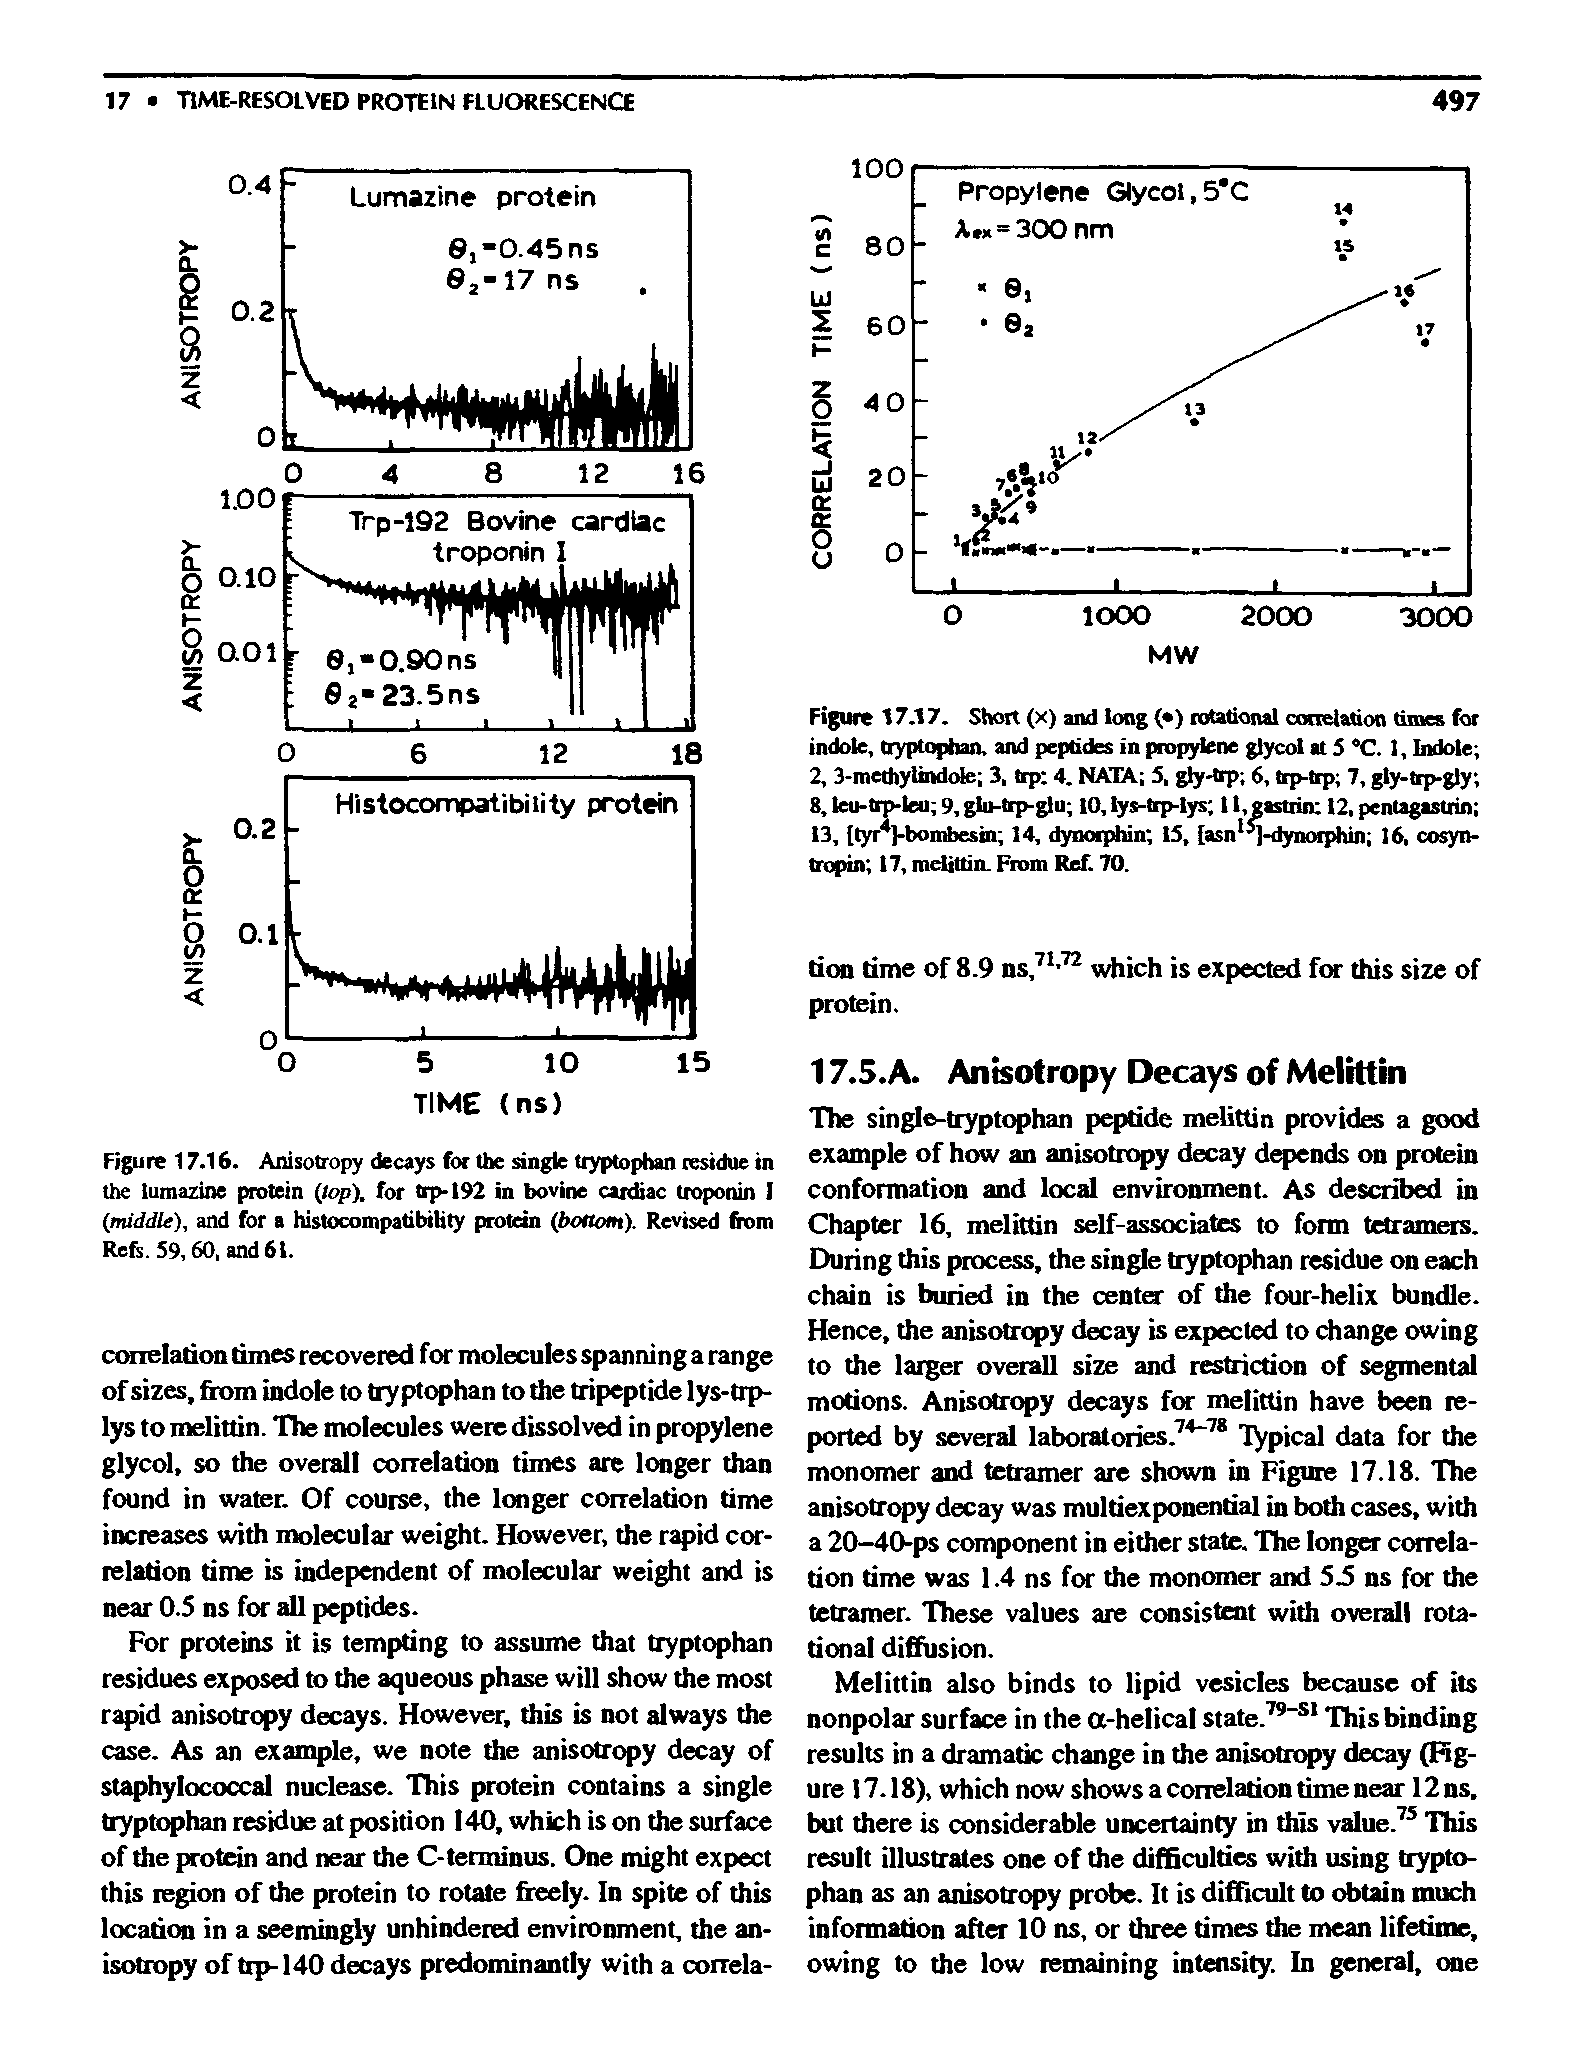 Figure 17.16. Anisotropy decays for the single tryptophan residue in the tumazine protein (/op), for trp I92 in bovine cardiac troponin I (middle), and for histocompatibility protein (bcttotn). Revised from Refr.59,60, and 61.